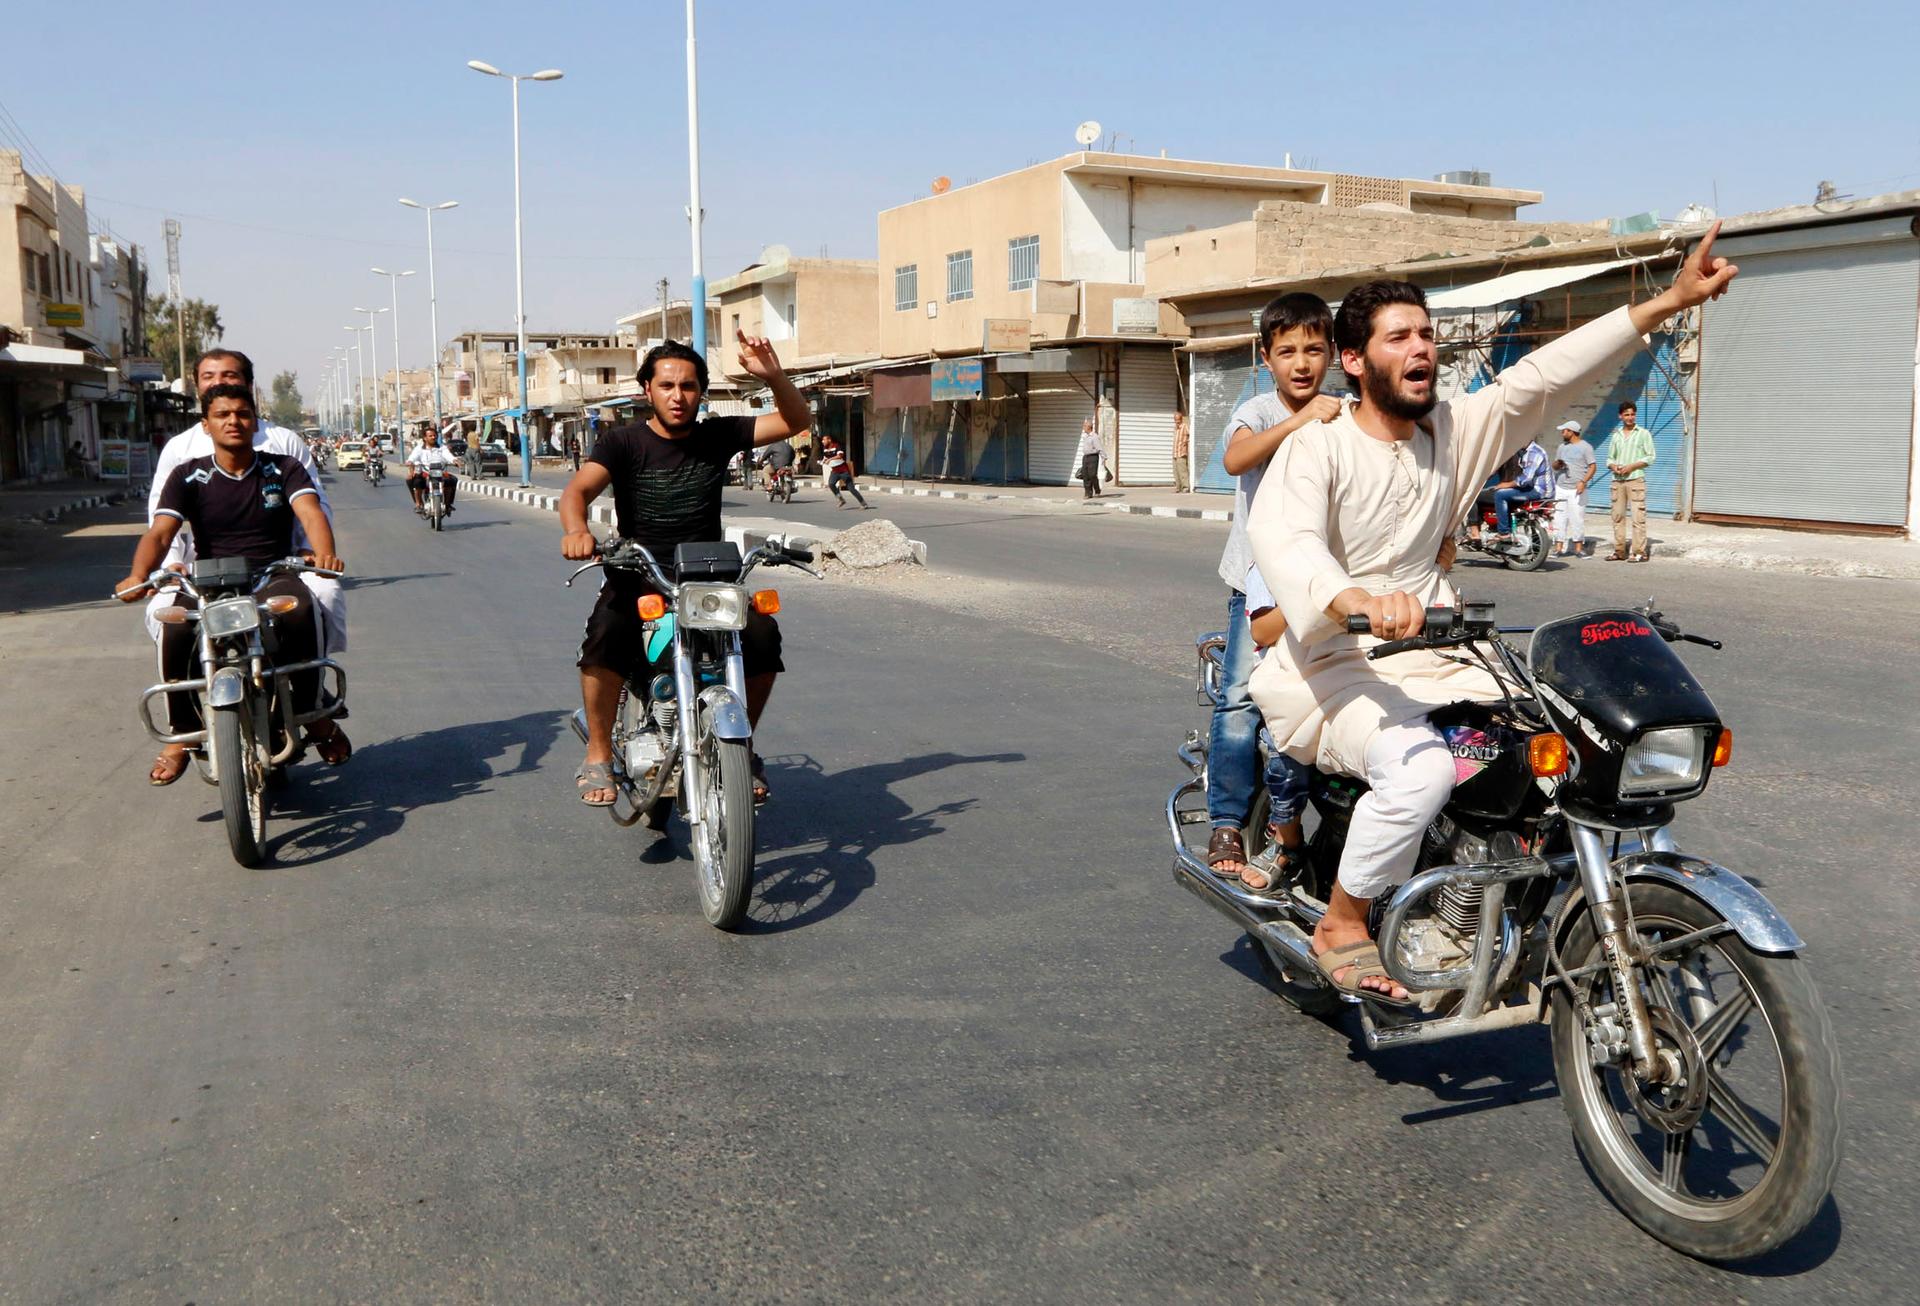 People in the Syrian city of Tabqa toured the streets in celebration after Islamic State militants took over a government air base nearby on August 24, 2014.